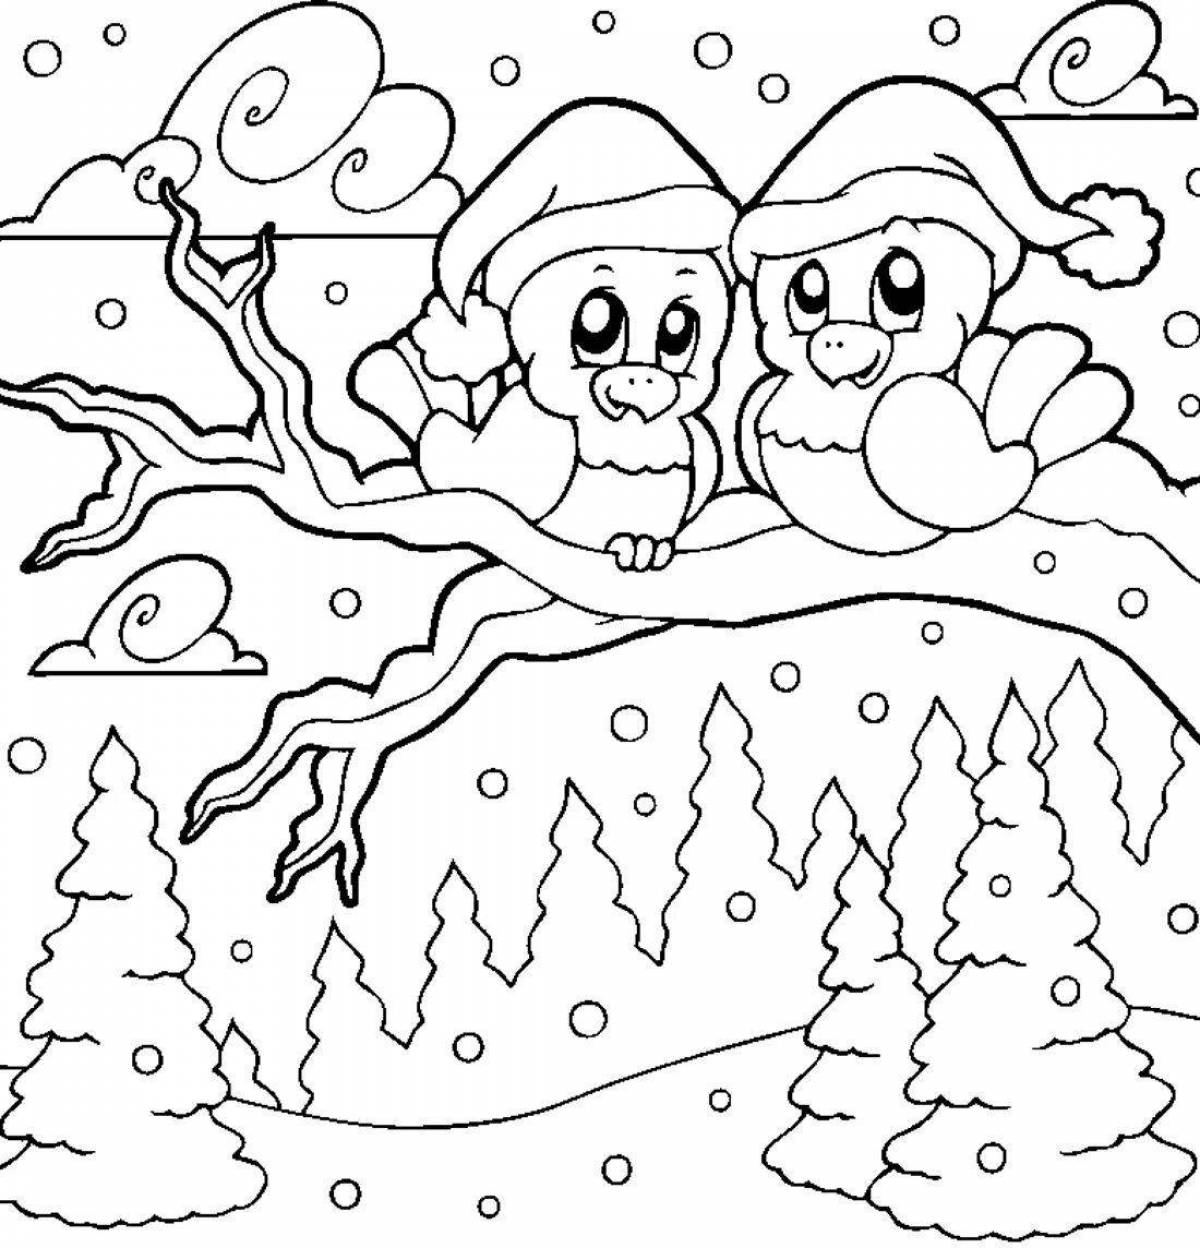 Bright January coloring book for kids